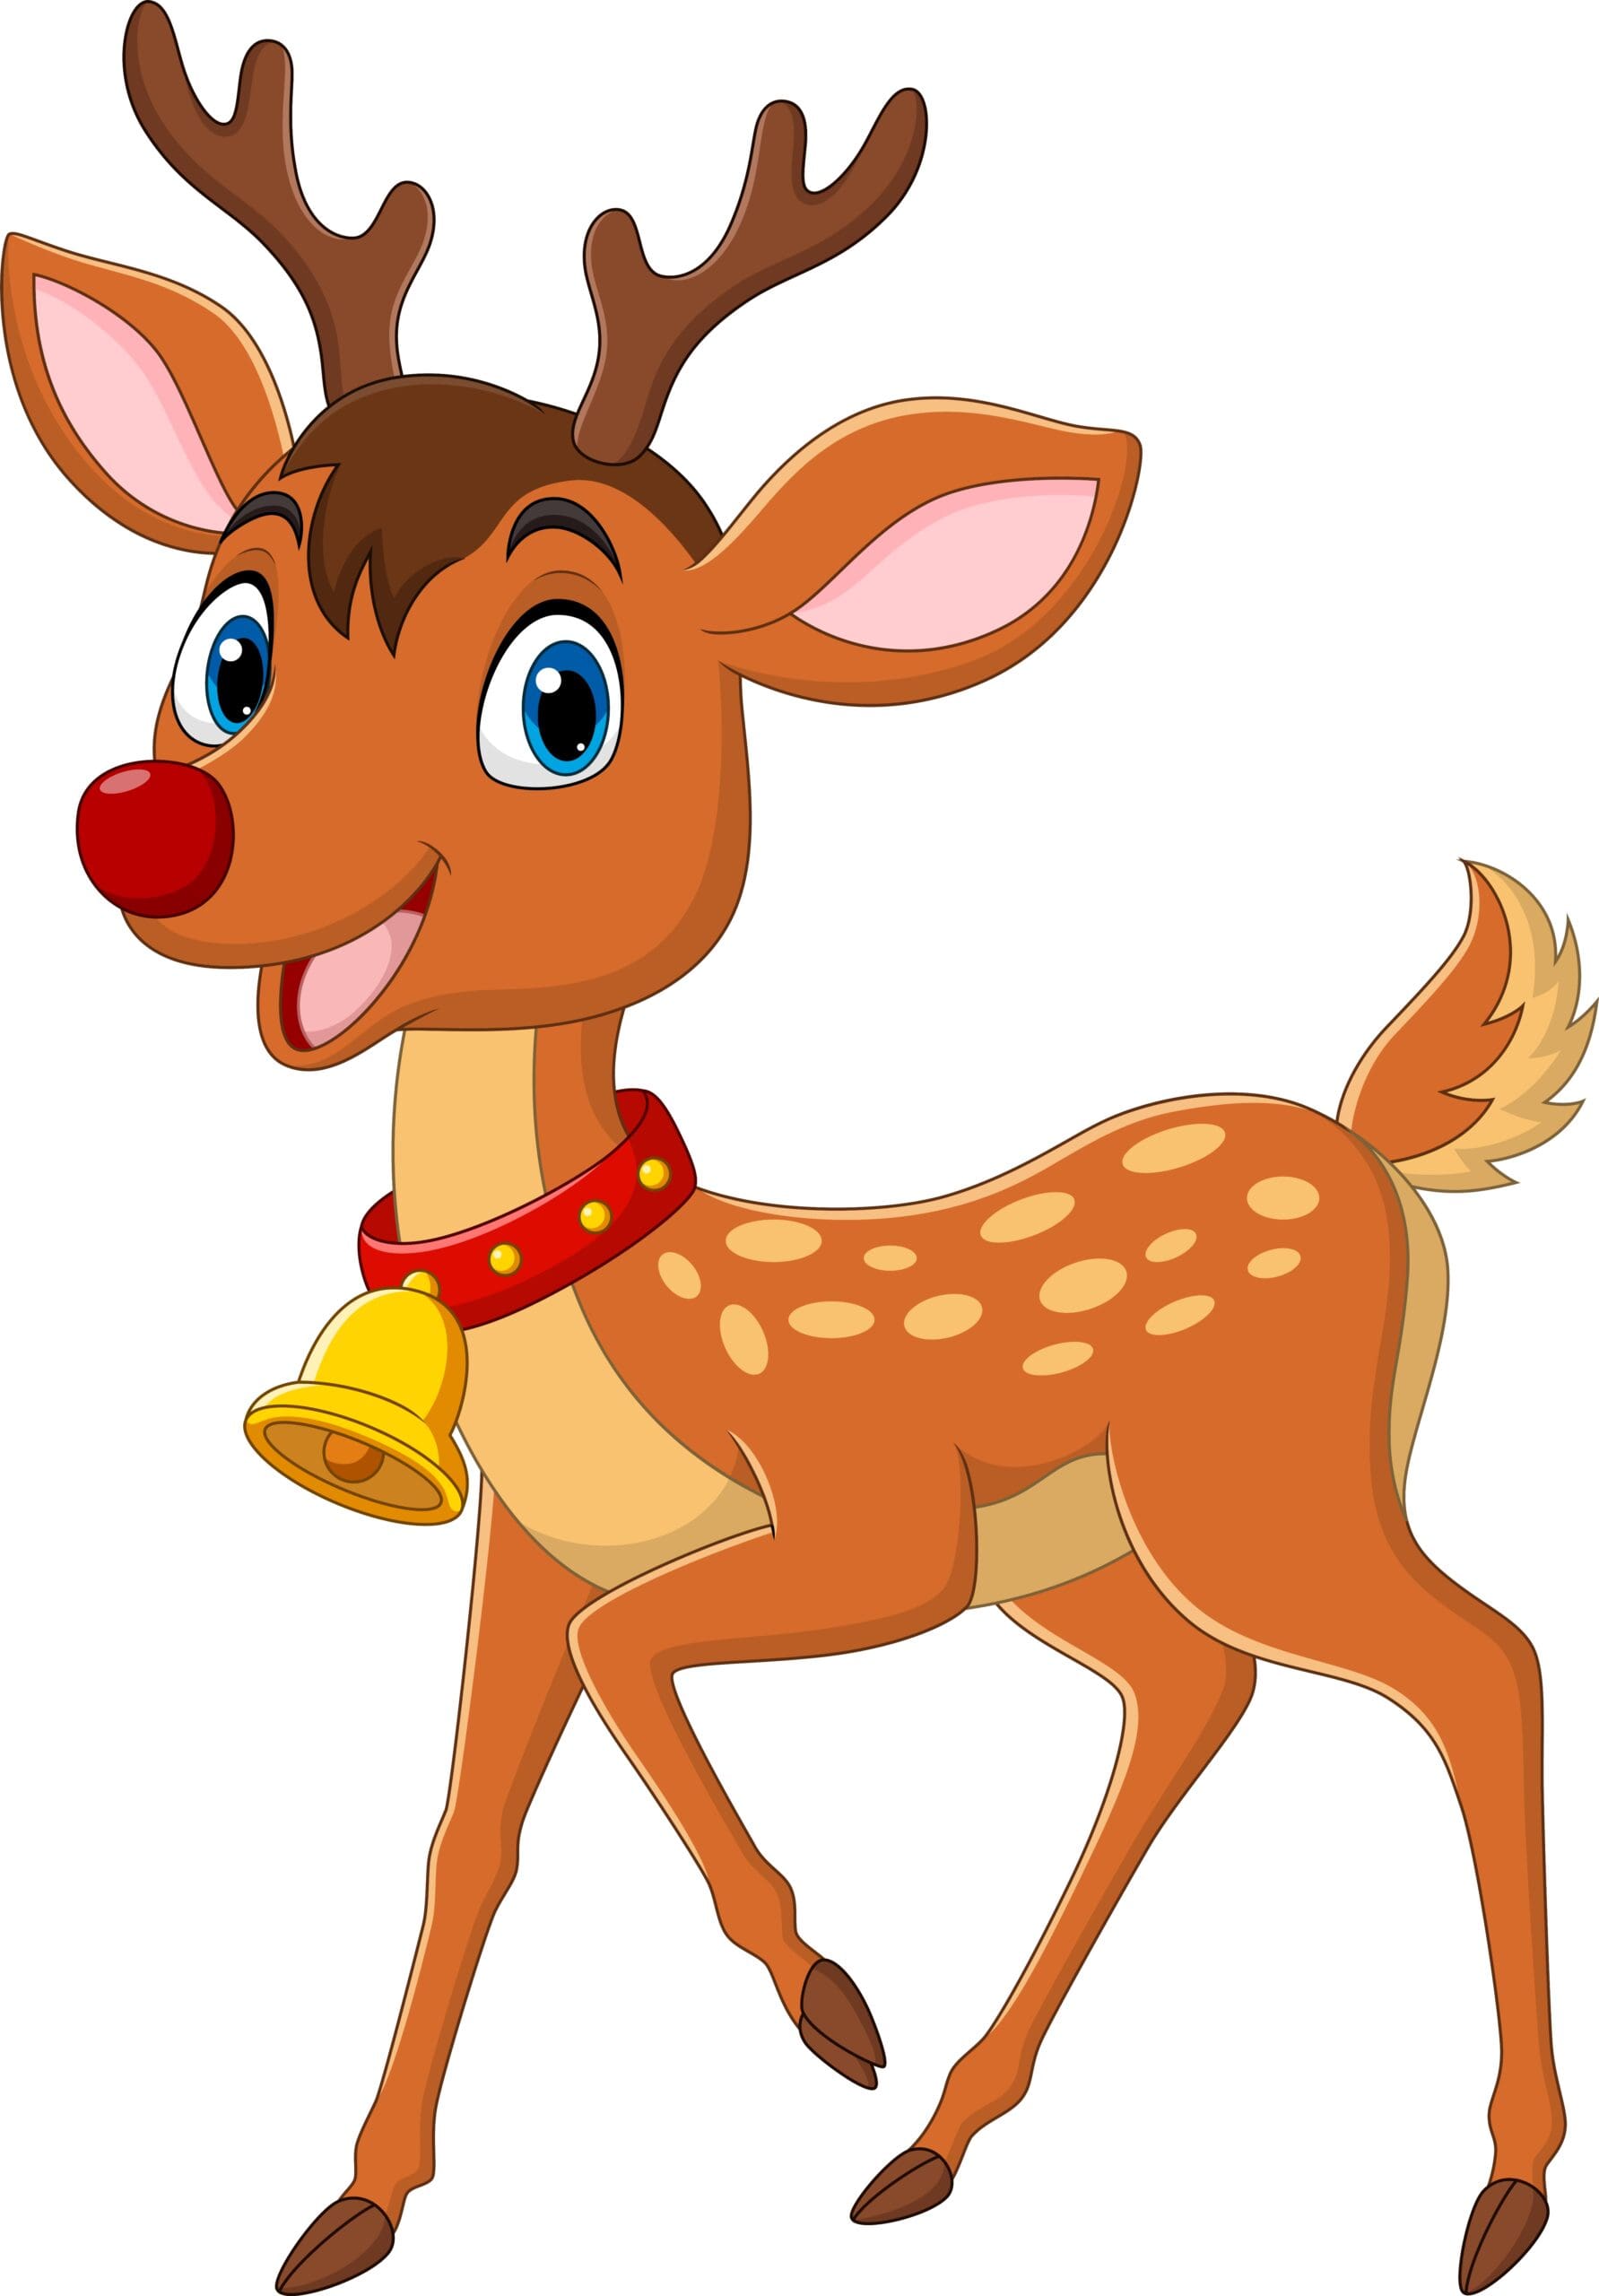 Cartoon graphic of a cheerful deer in a forest setting.